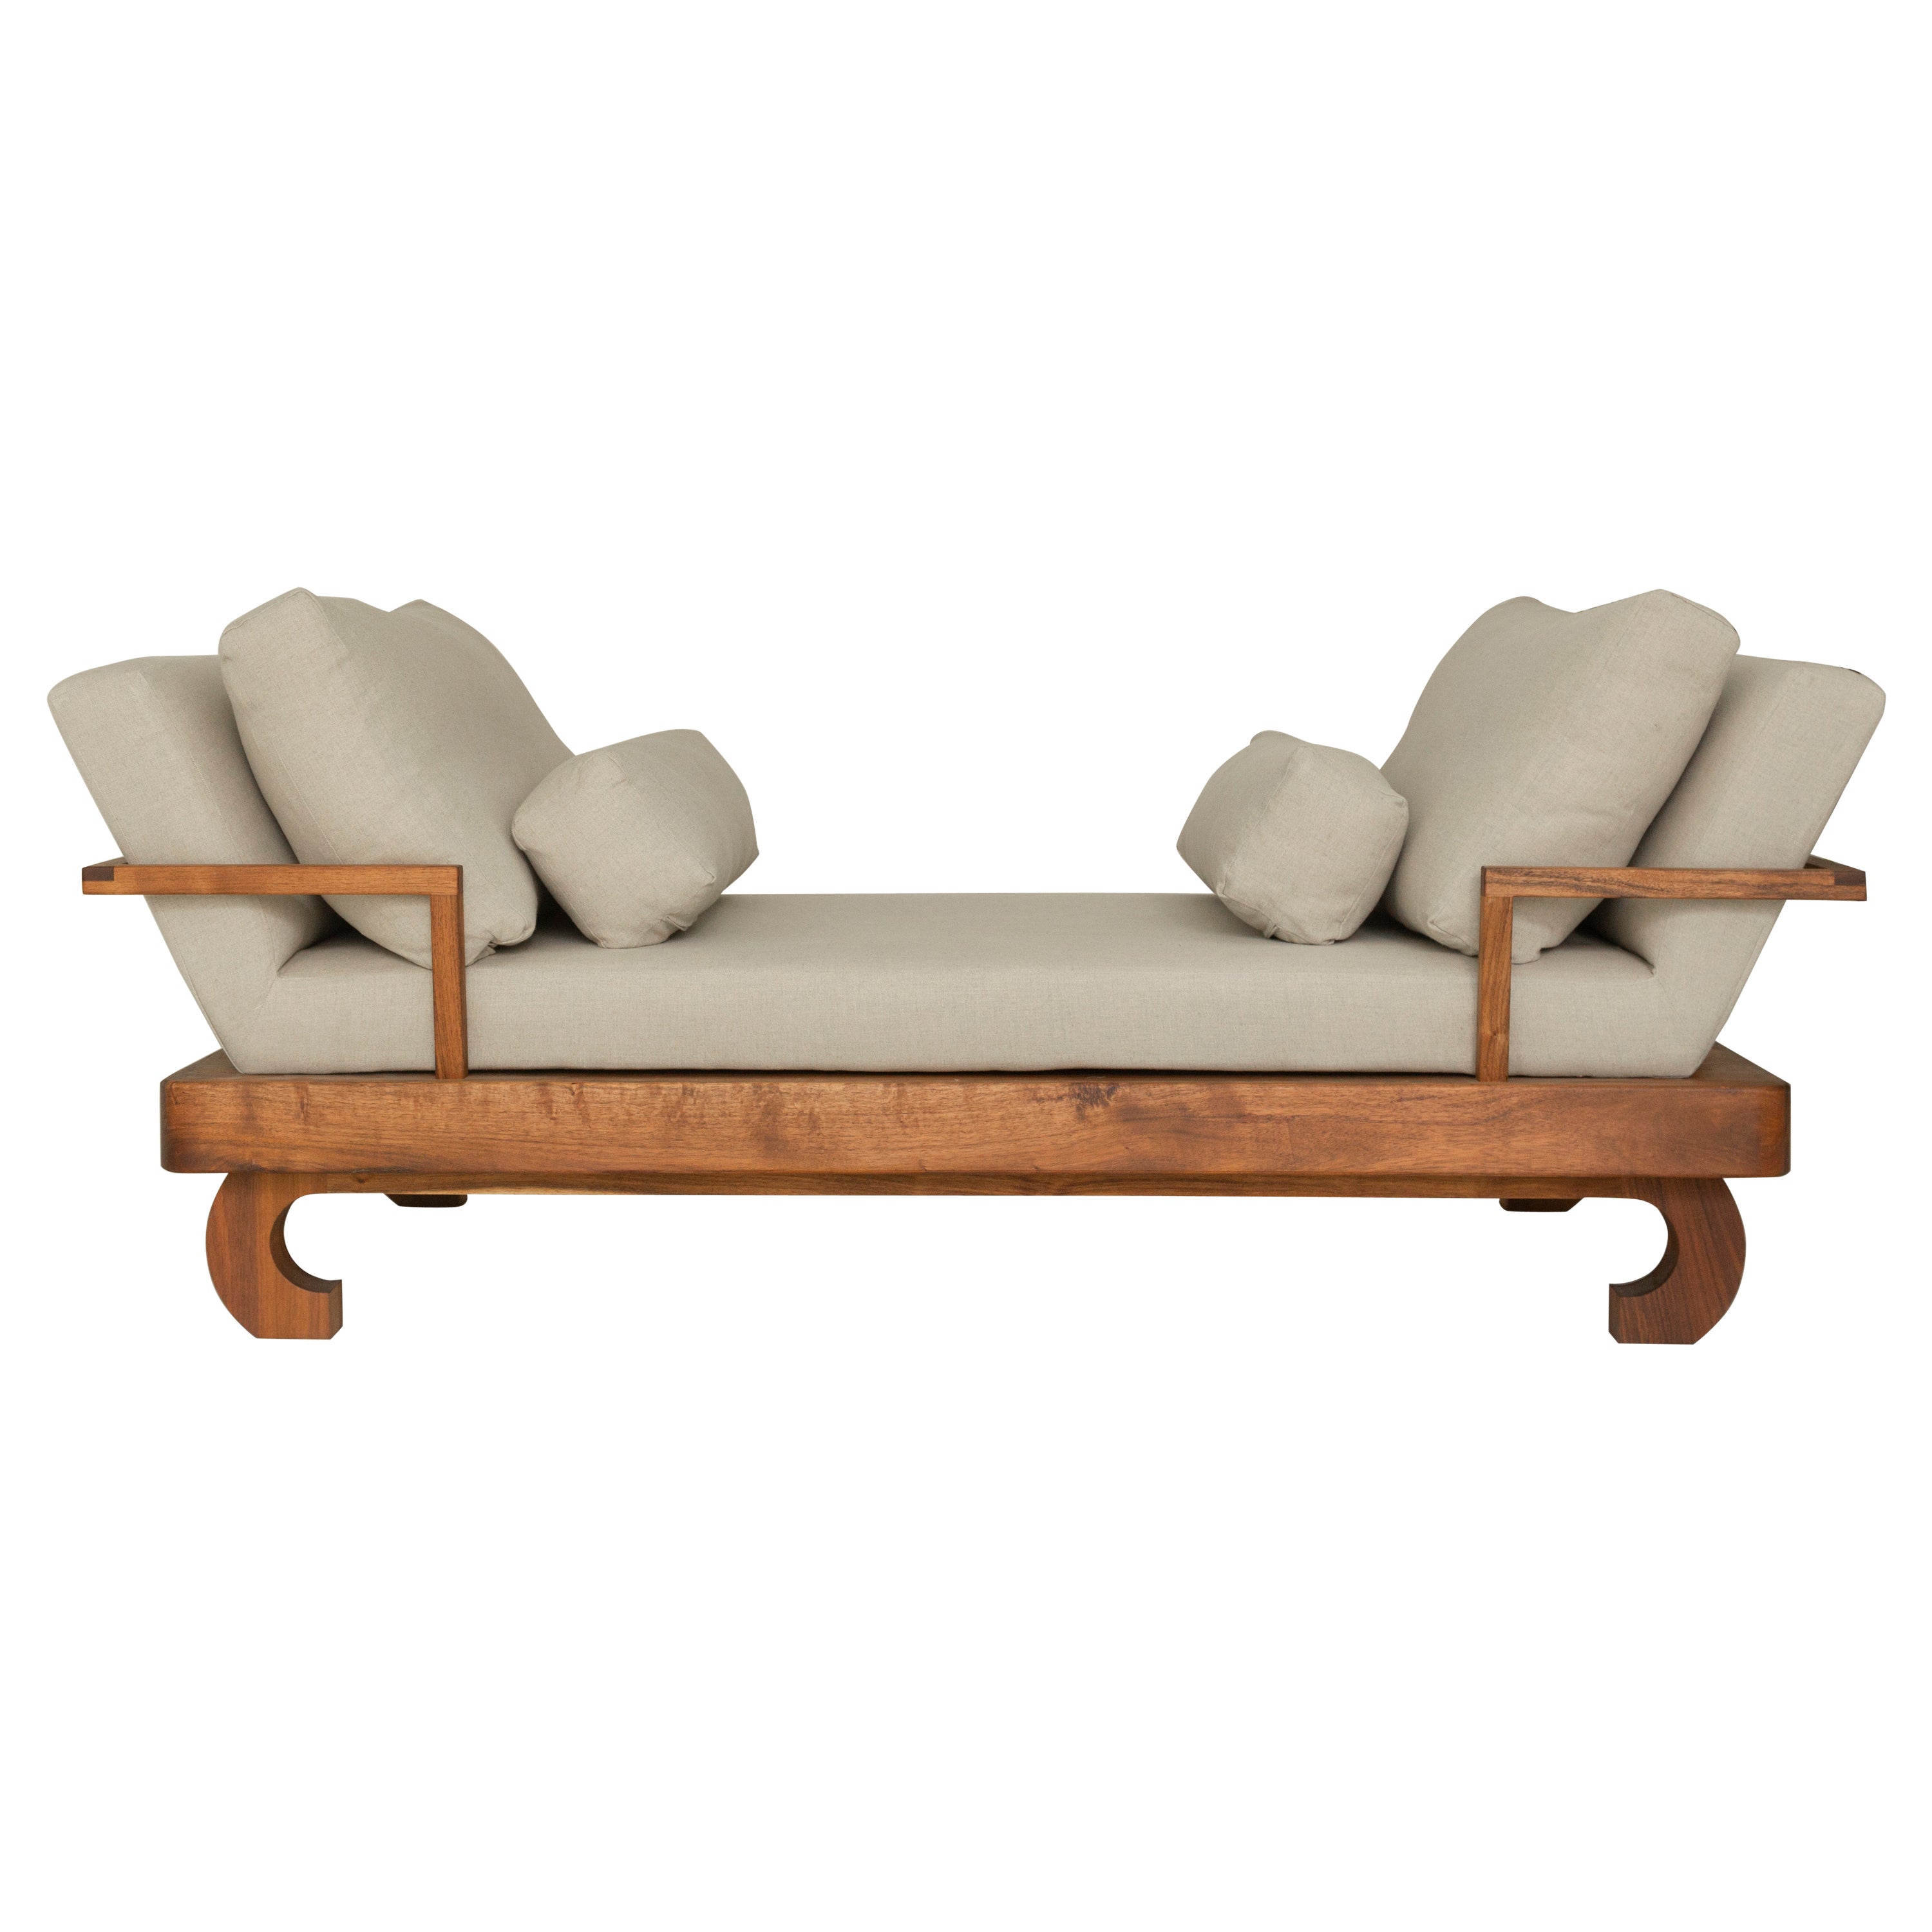 Marruecos Daybed in Tzalam Wood and Fabric in Linen Designed by Tana Karei For Sale